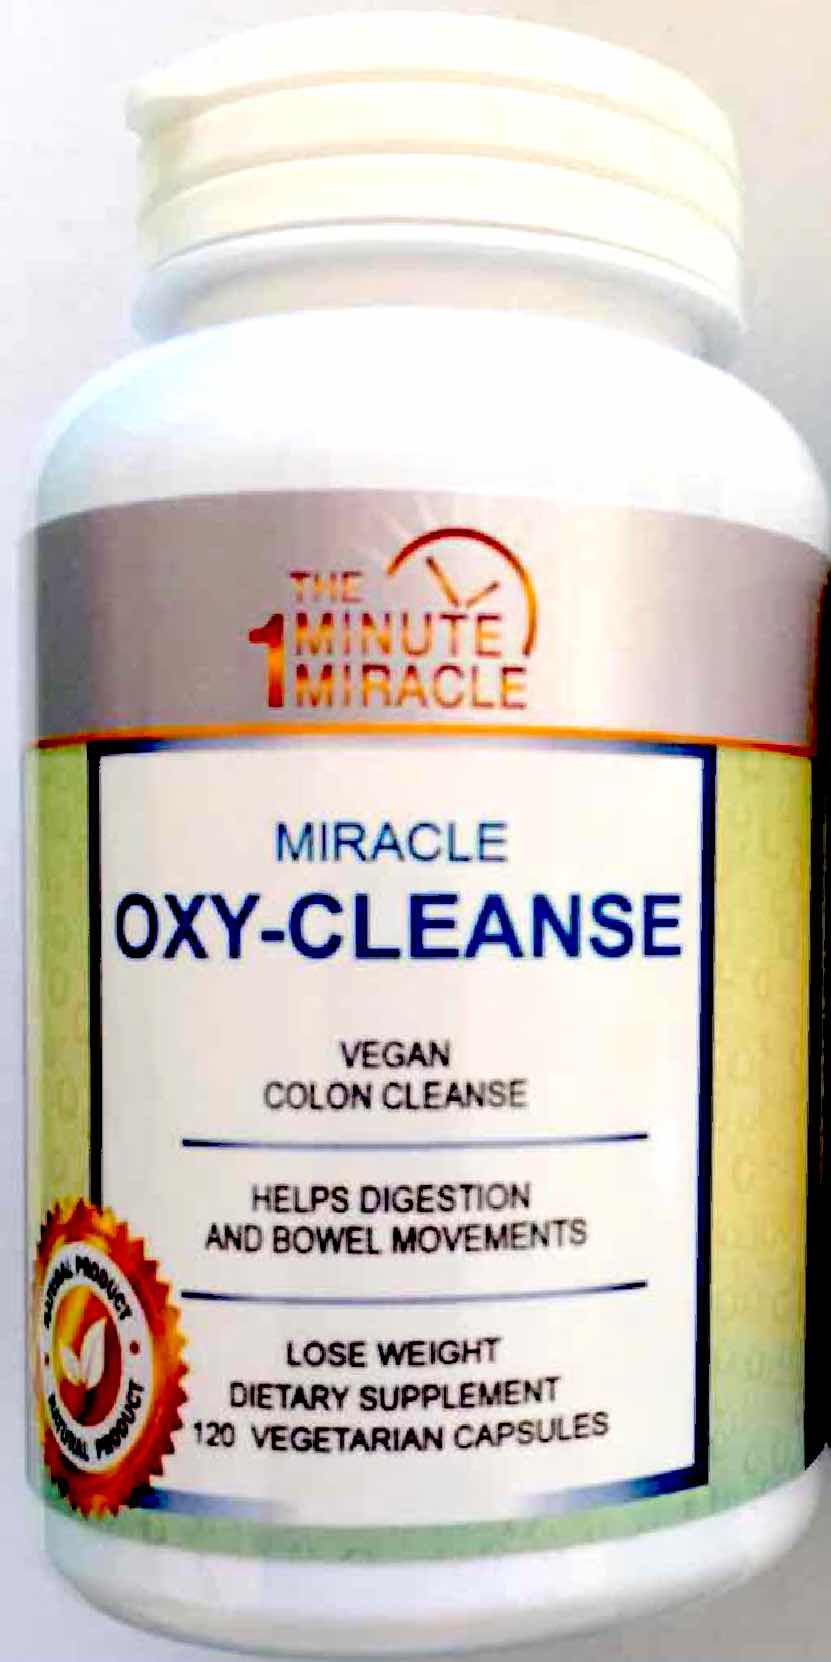 Oxy-Cleanse Colon Cleanser and Detox - Intestinal Cleanse